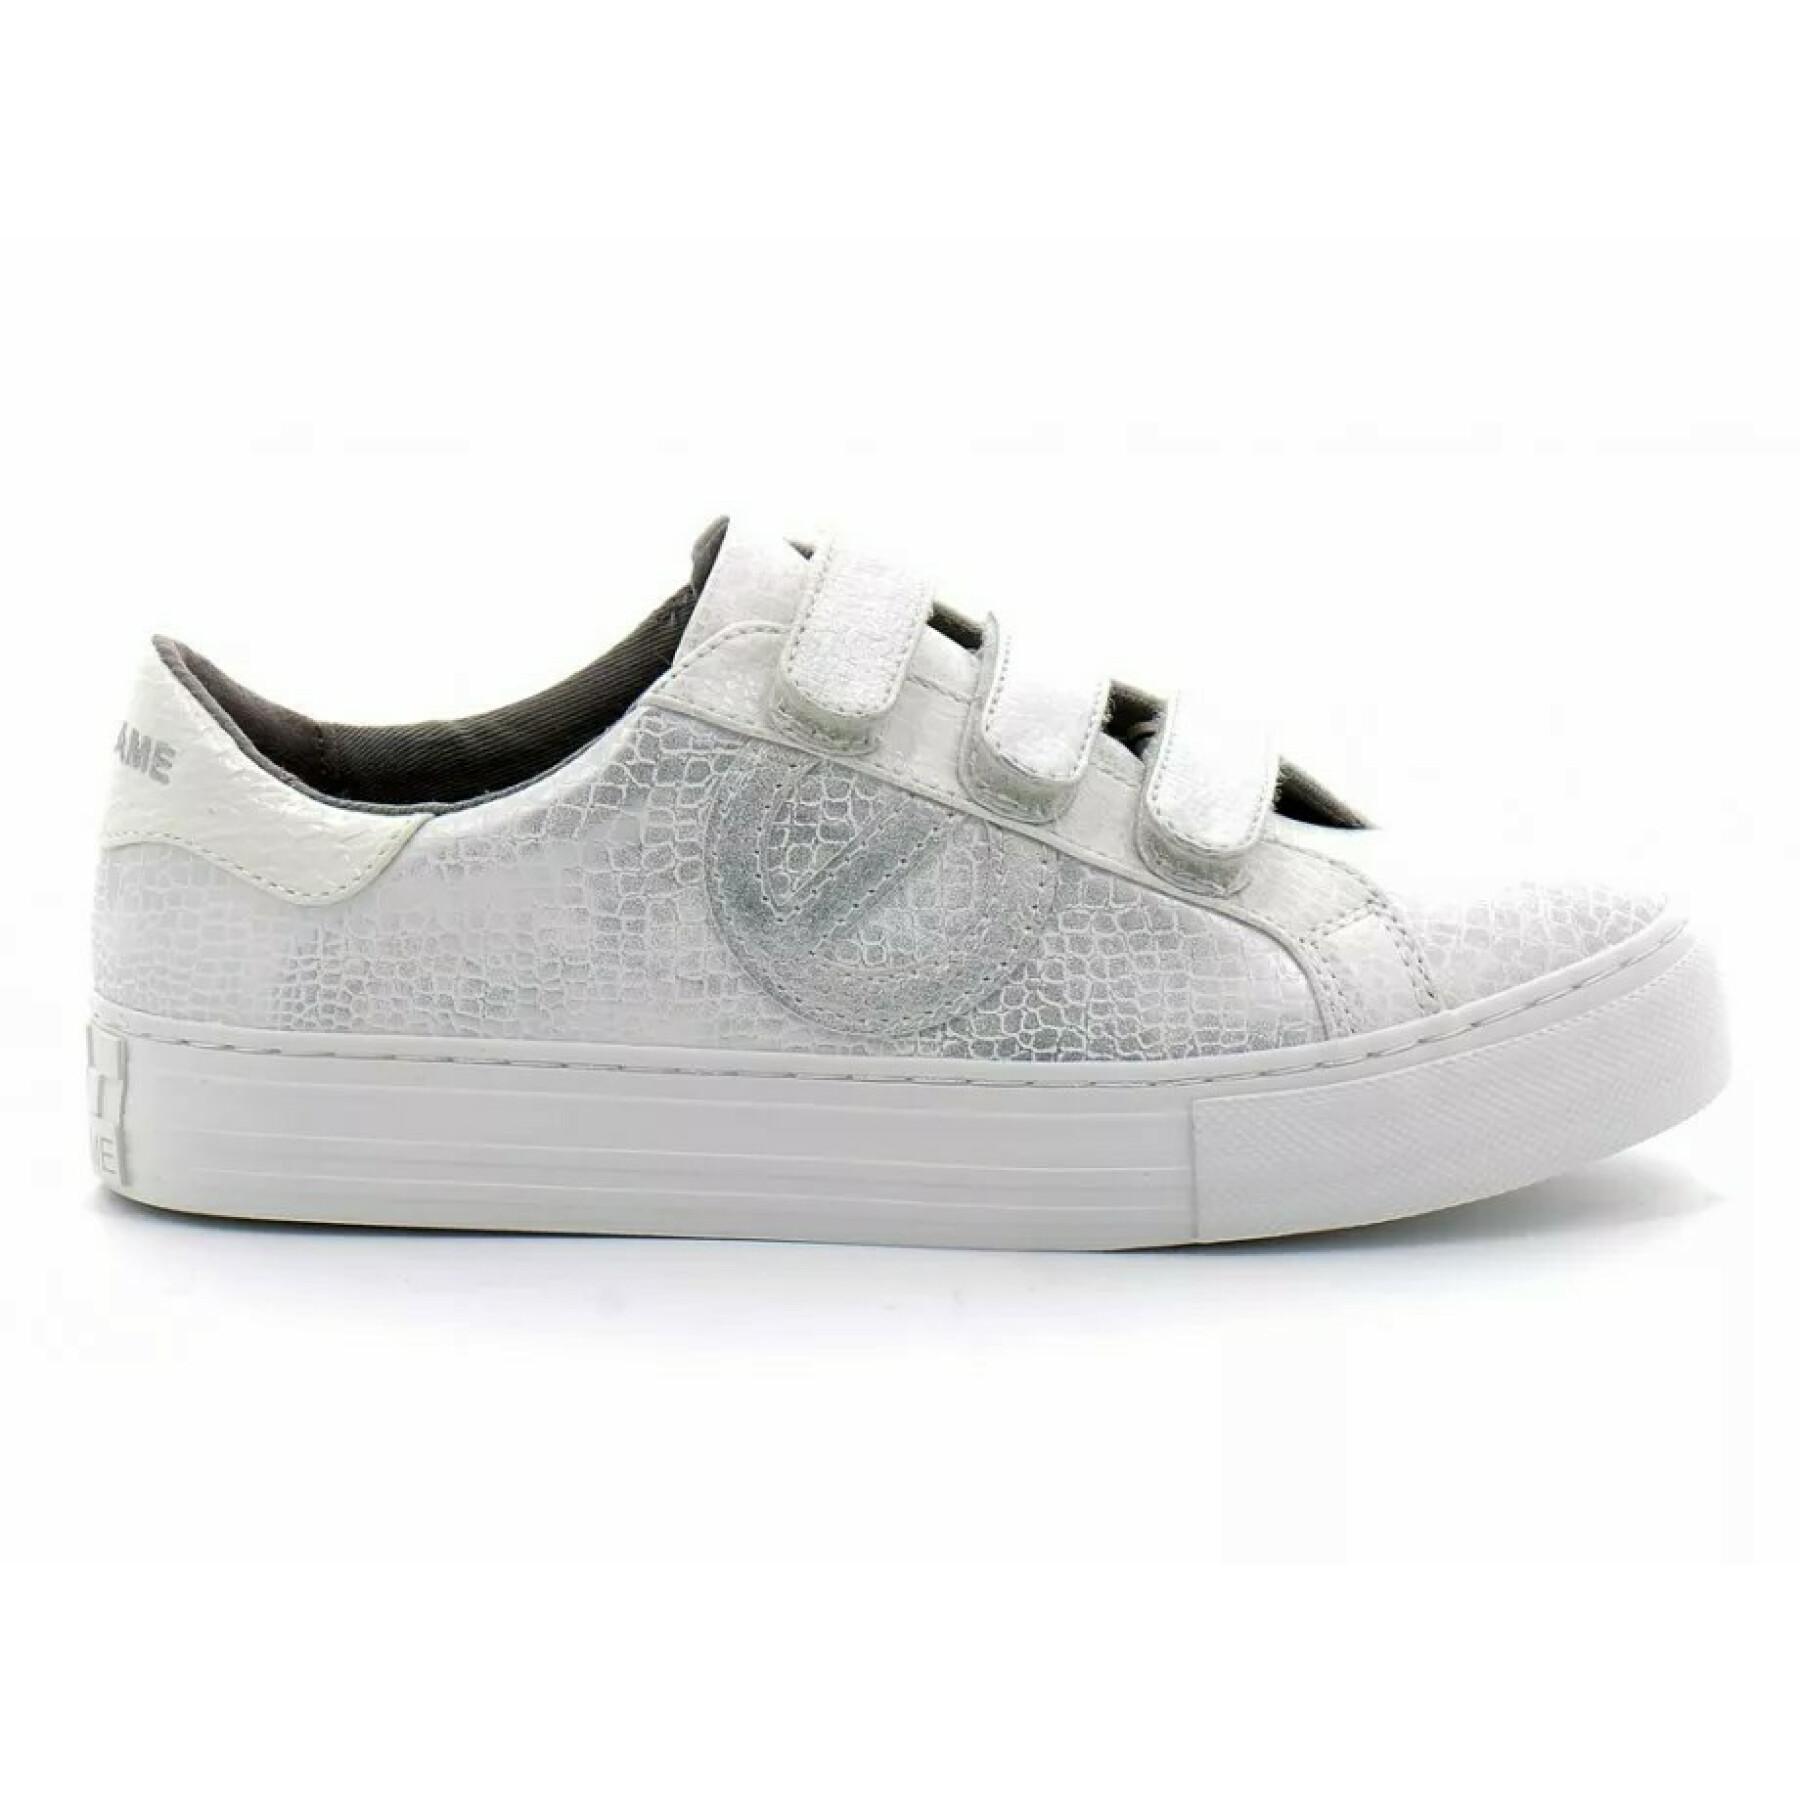 Women's sneakers No Name Arcade straps side master/foggy